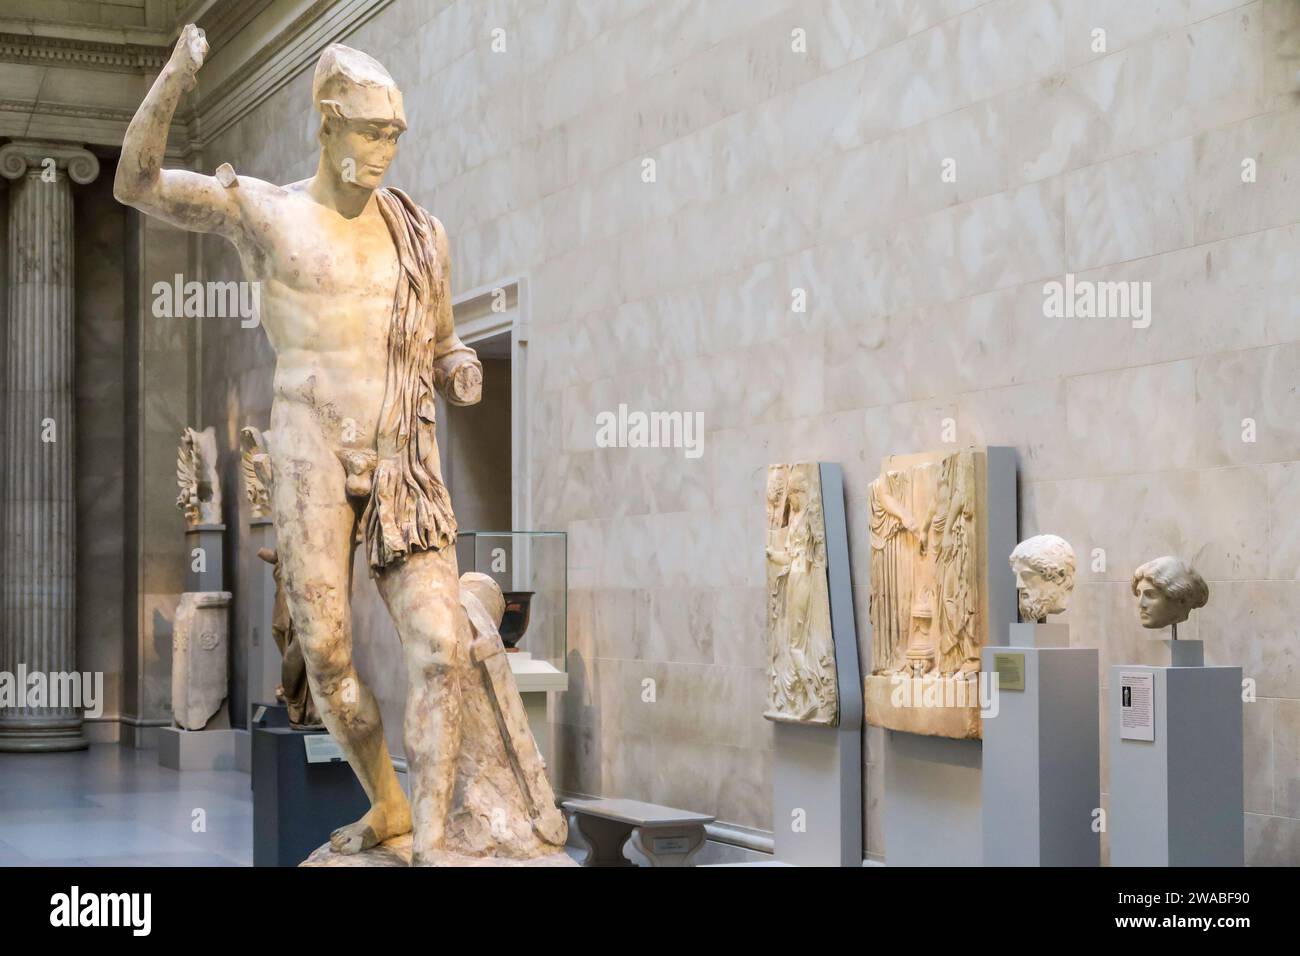 Marble Statue of Wounded Warrior, Metropolitan Museum of Art, New York City, USA Stock Photo